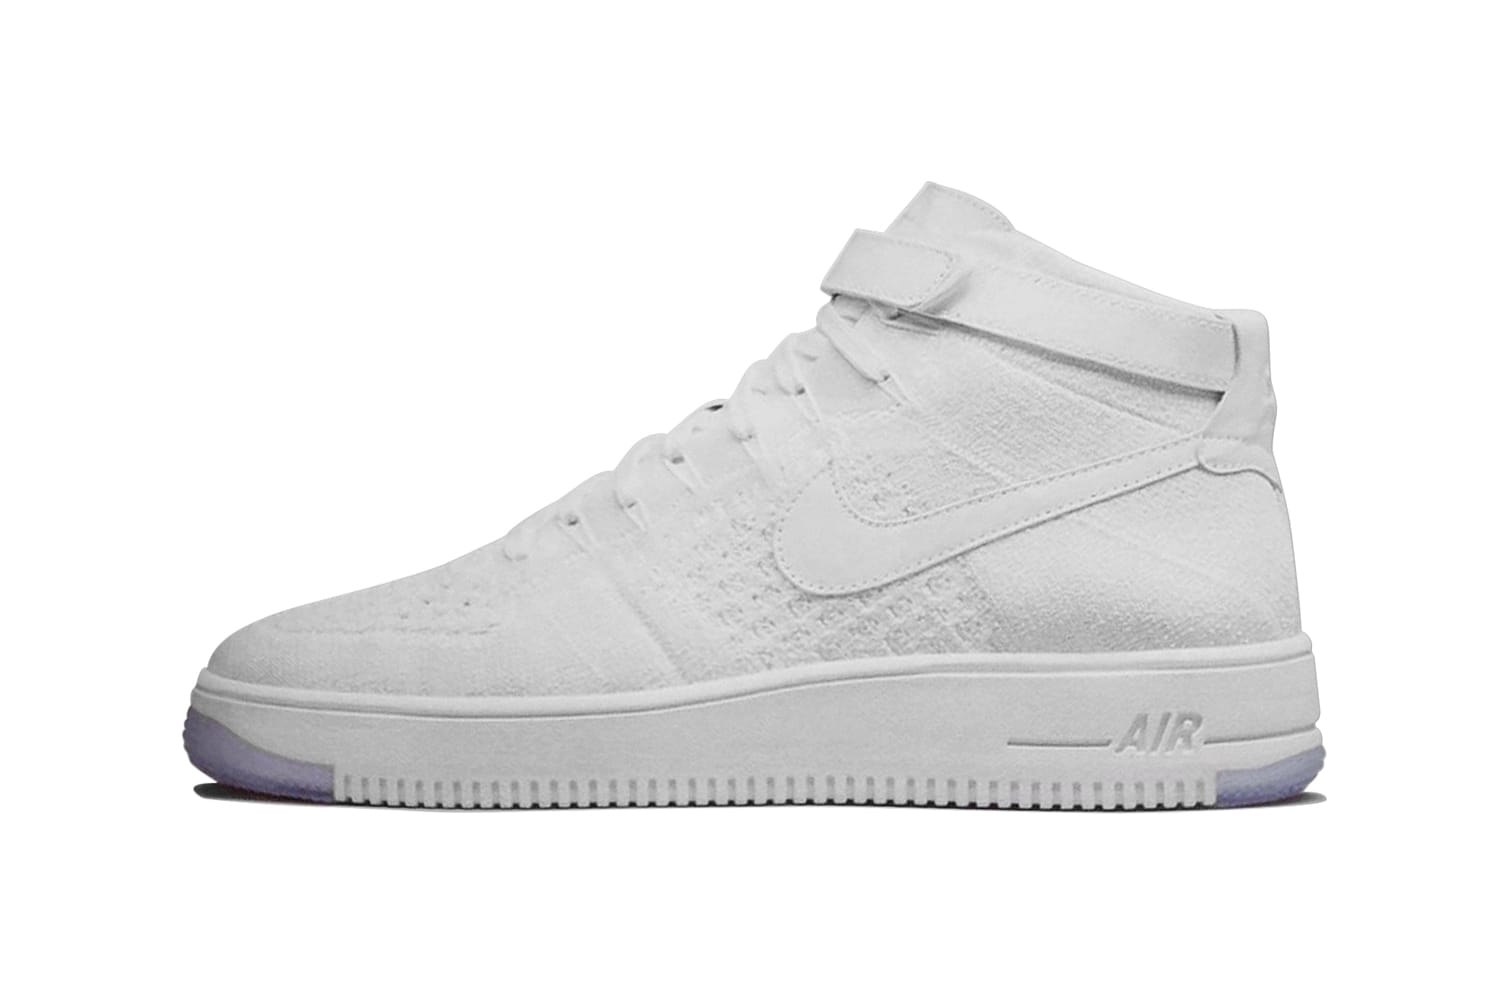 A First Look at the Nike Air Force 1 Flyknit Sneaker | HYPEBEAST